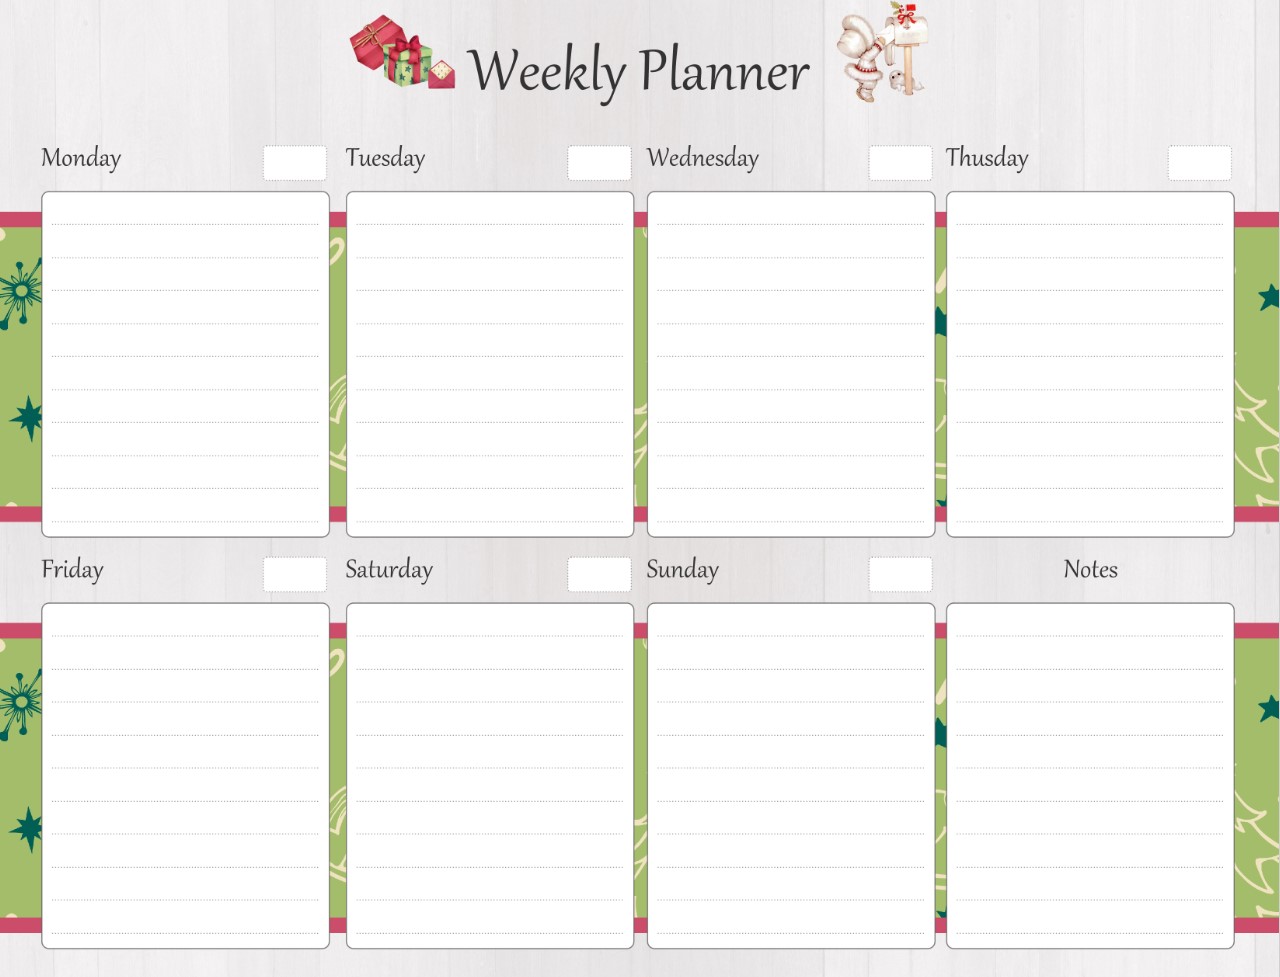 Christmas Weekly Planner Work, US Letter Planner to resize, Insert Printable Planner, Instant Download